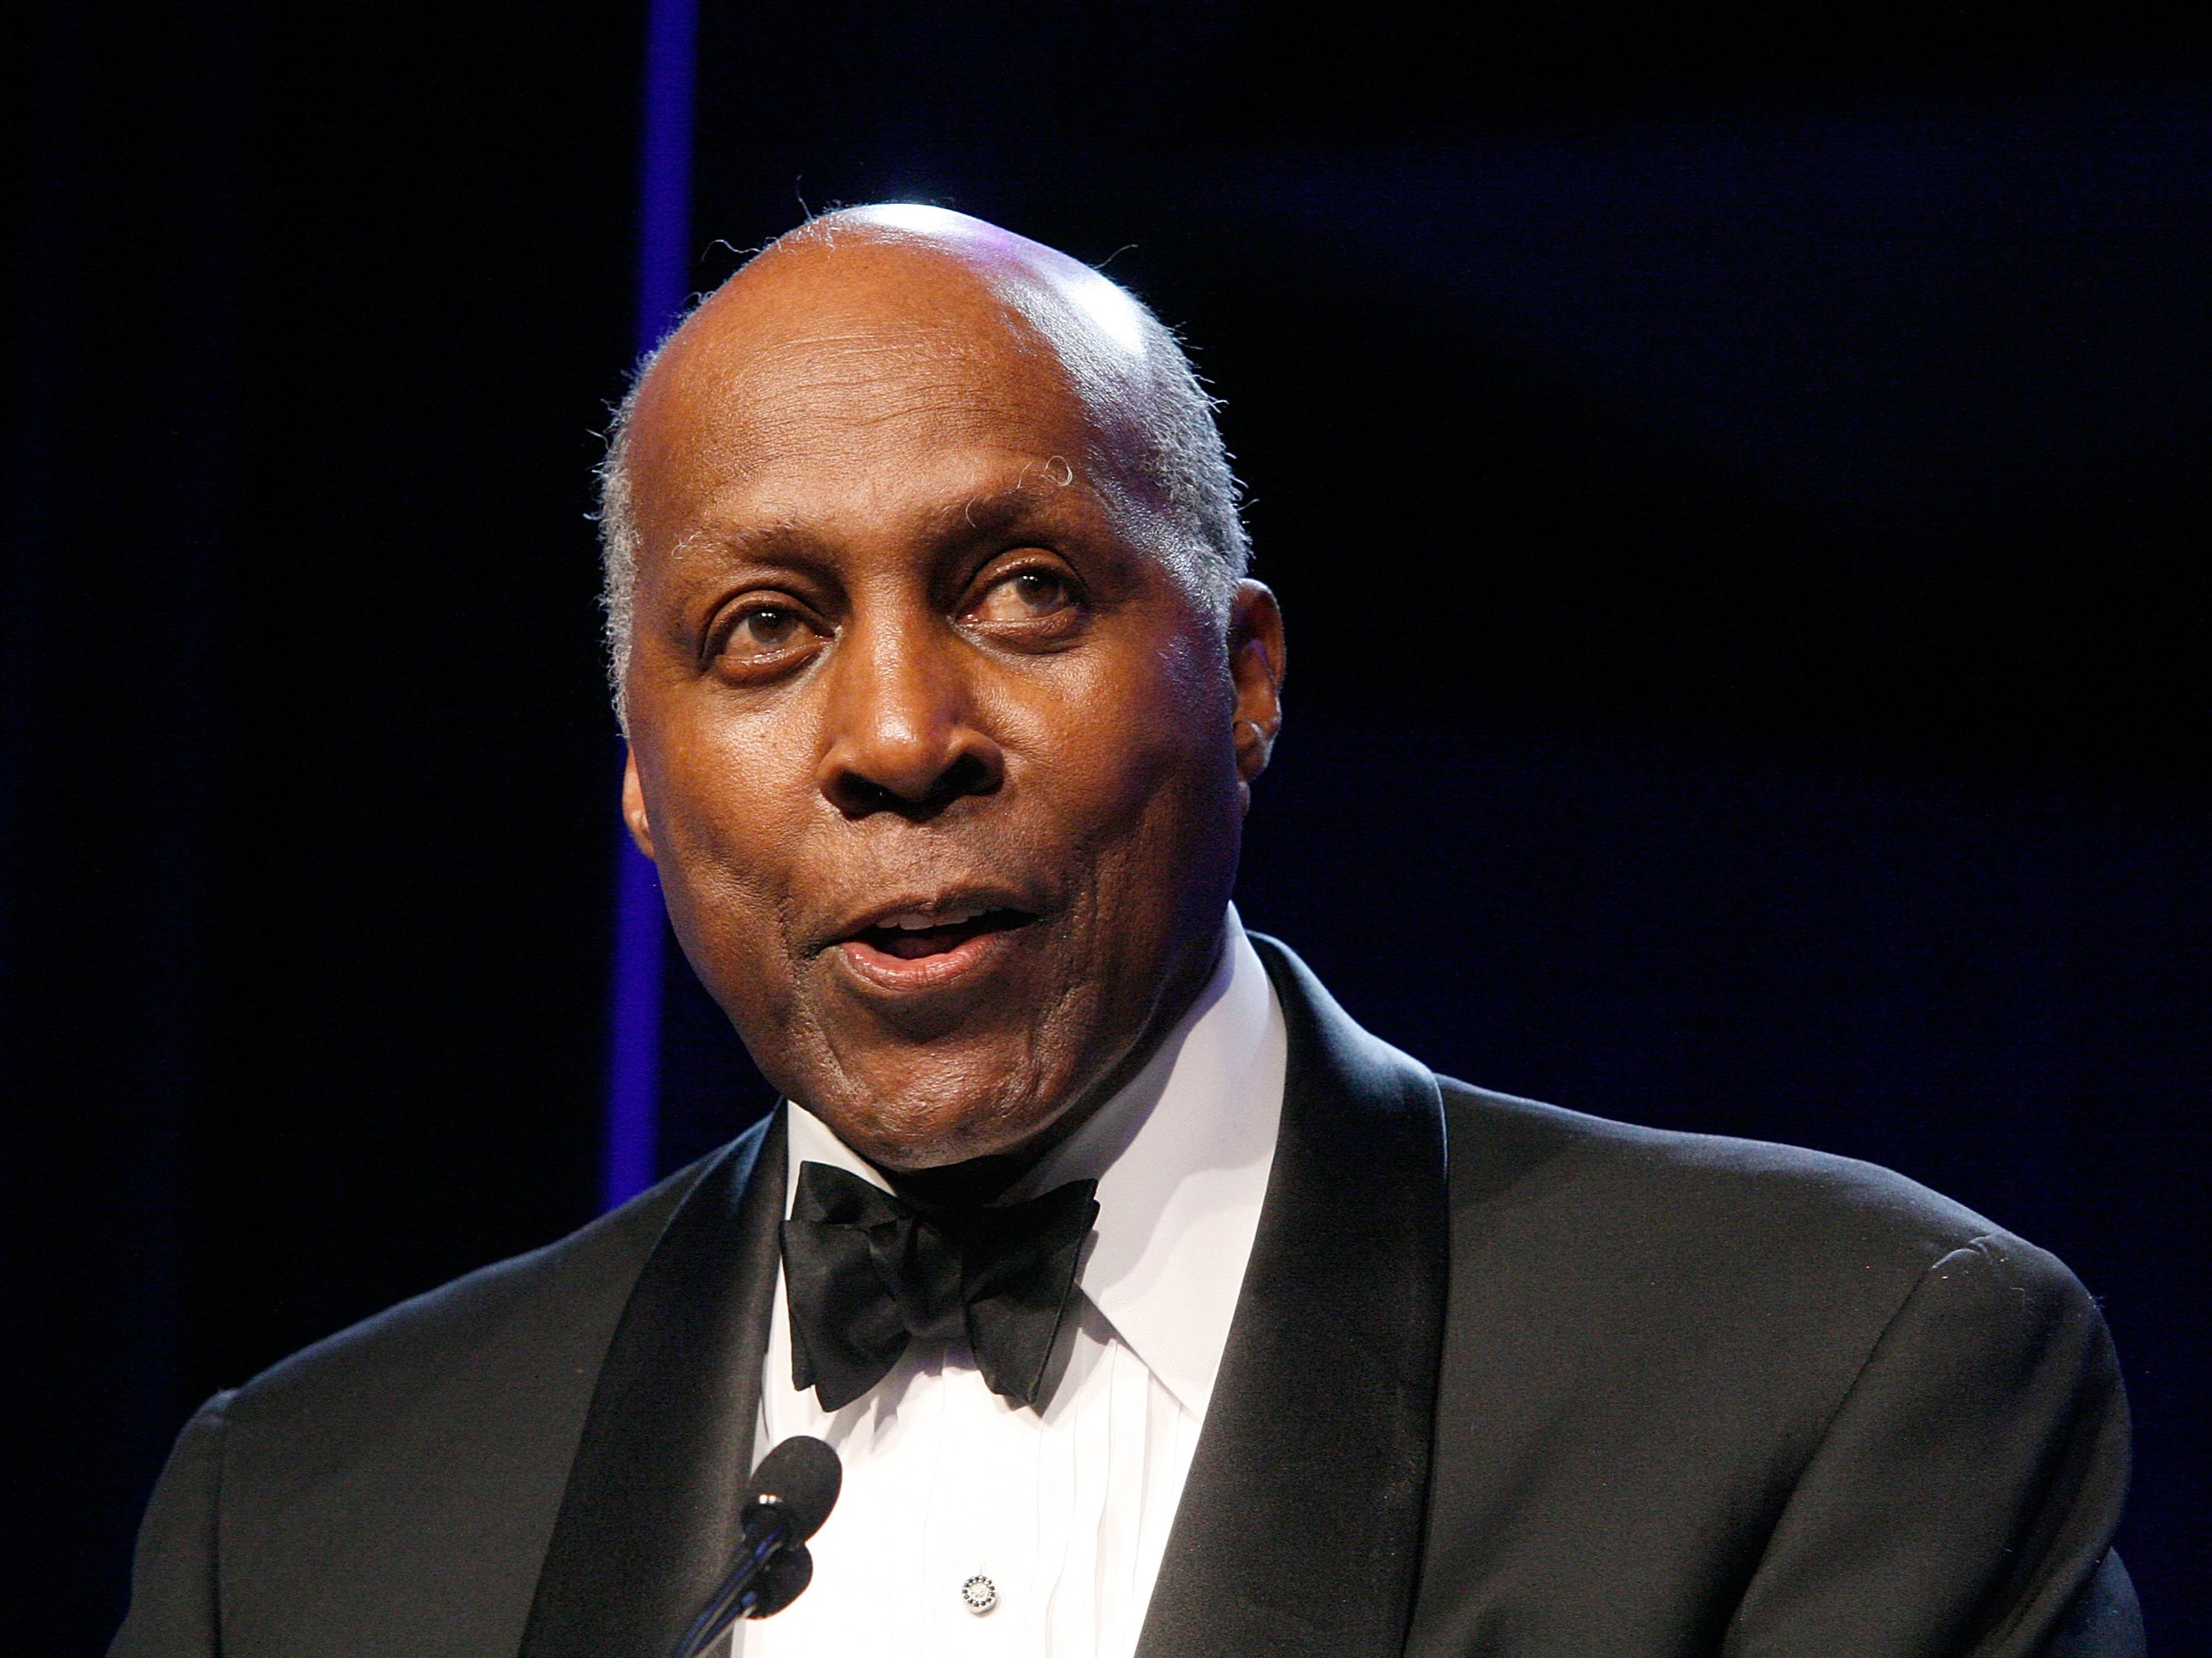 Vernon Jordan attends the 40th Anniversary Gala for “A Mind Is A Terrible Thing To Waste” Campaign on March 3, 2011 in New York City.